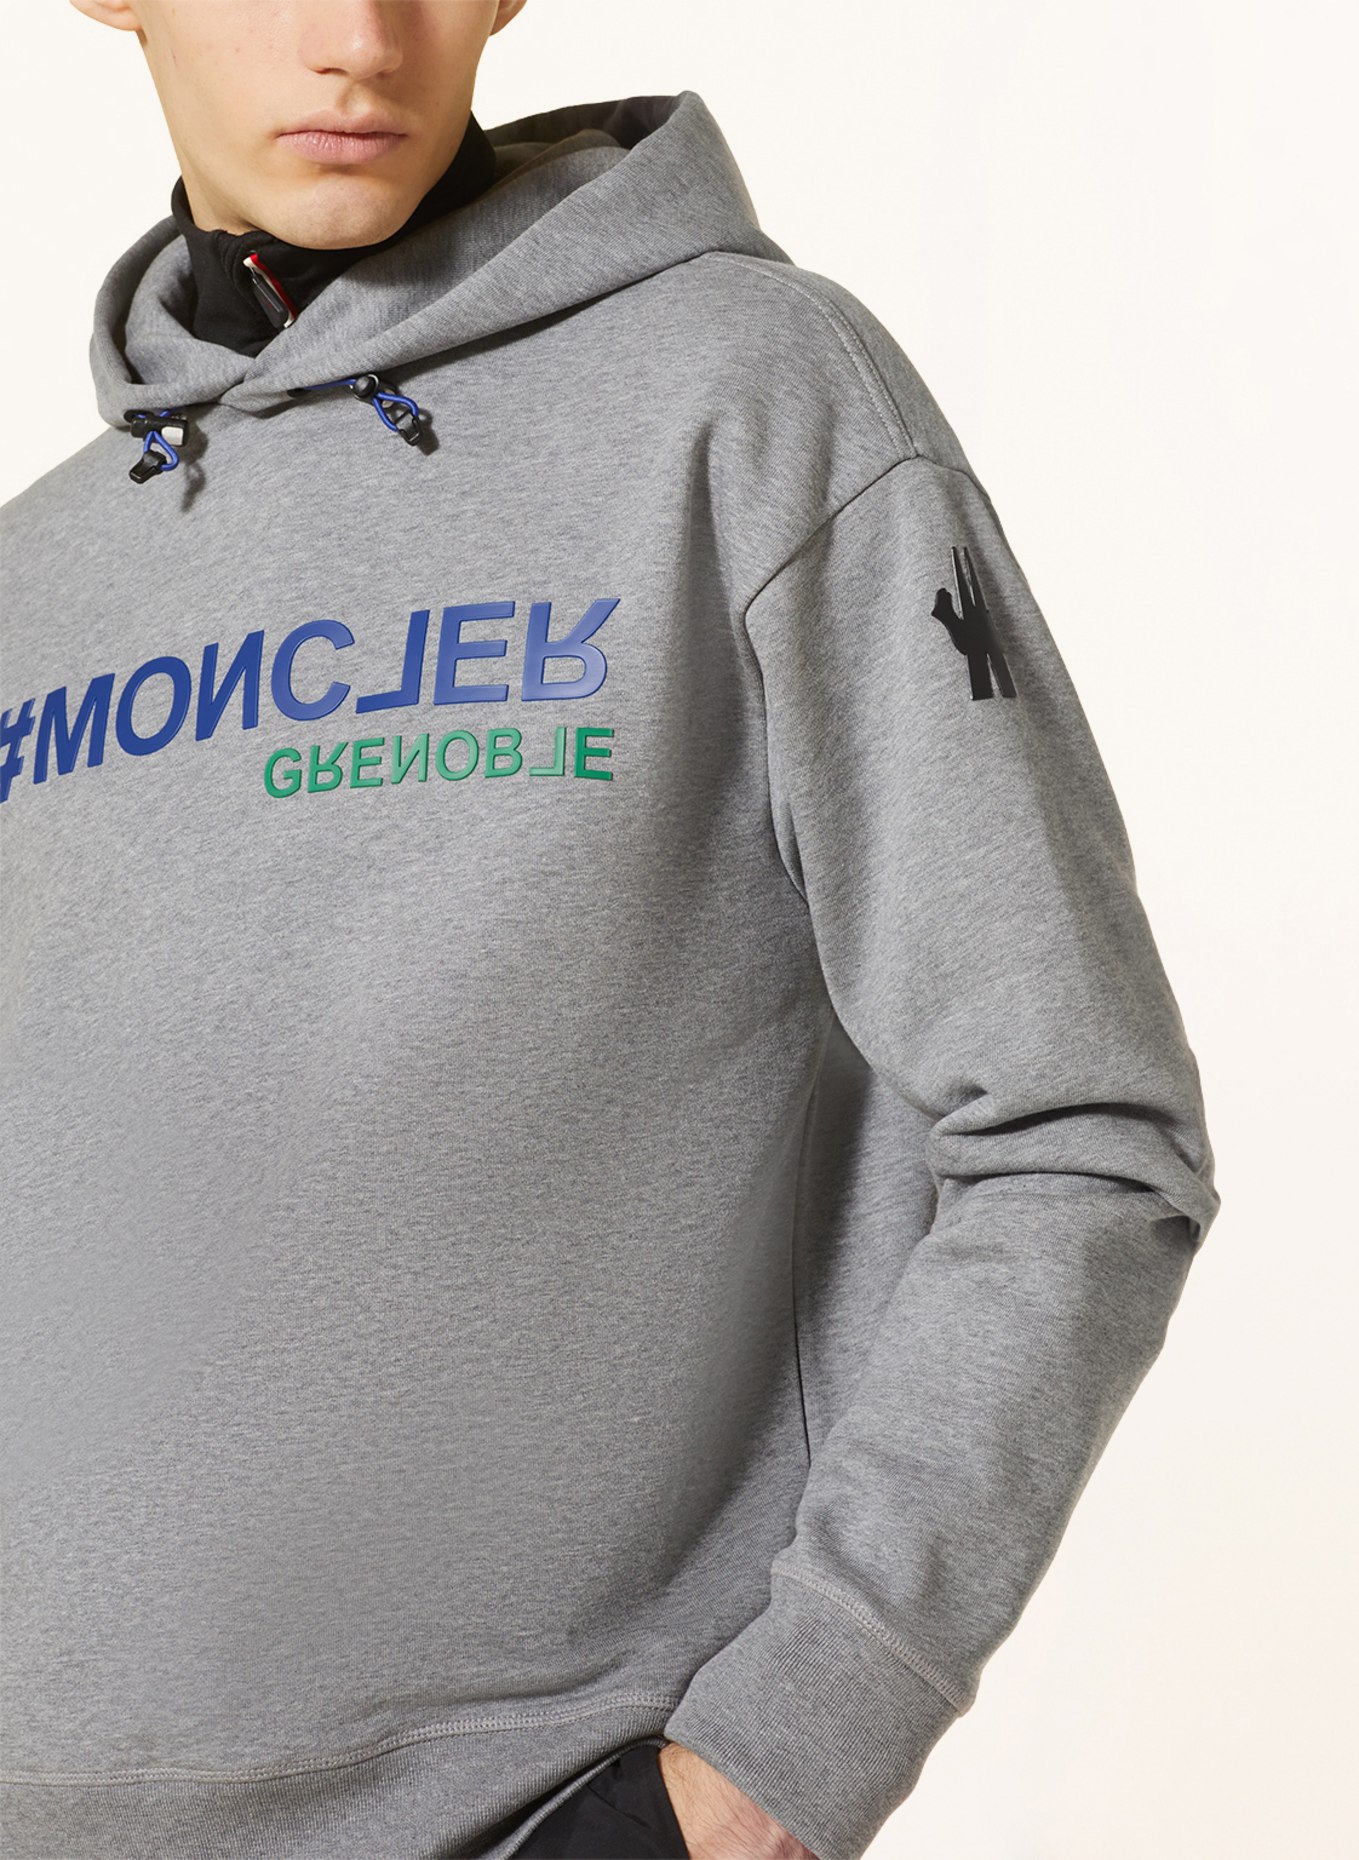 MONCLER GRENOBLE Hoodie, Color: GRAY (Image 5)